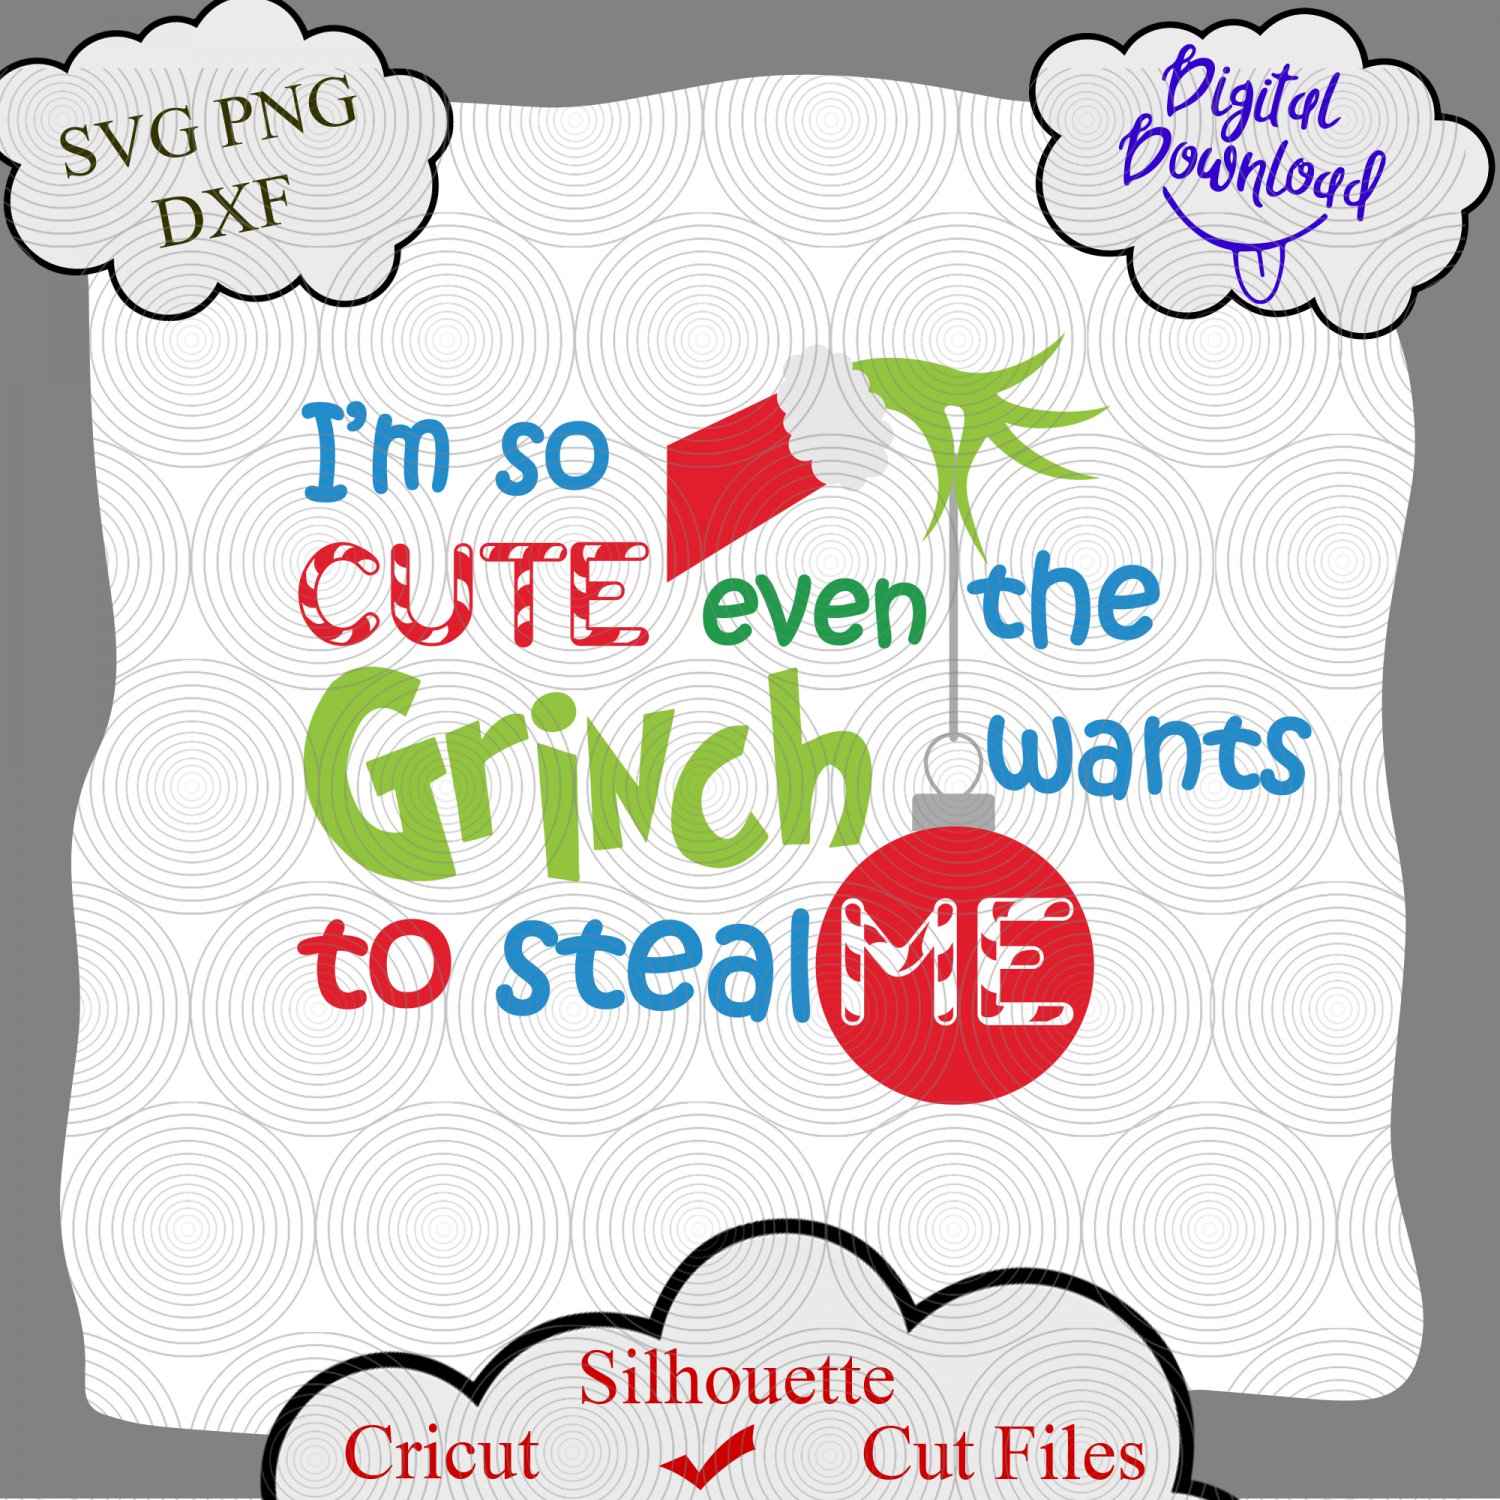 Download Grinch Want To Steal Me Svg Grinch Svg Grinch Png Grinch Quotes Svg Grinch Quotes Grinch Shirt